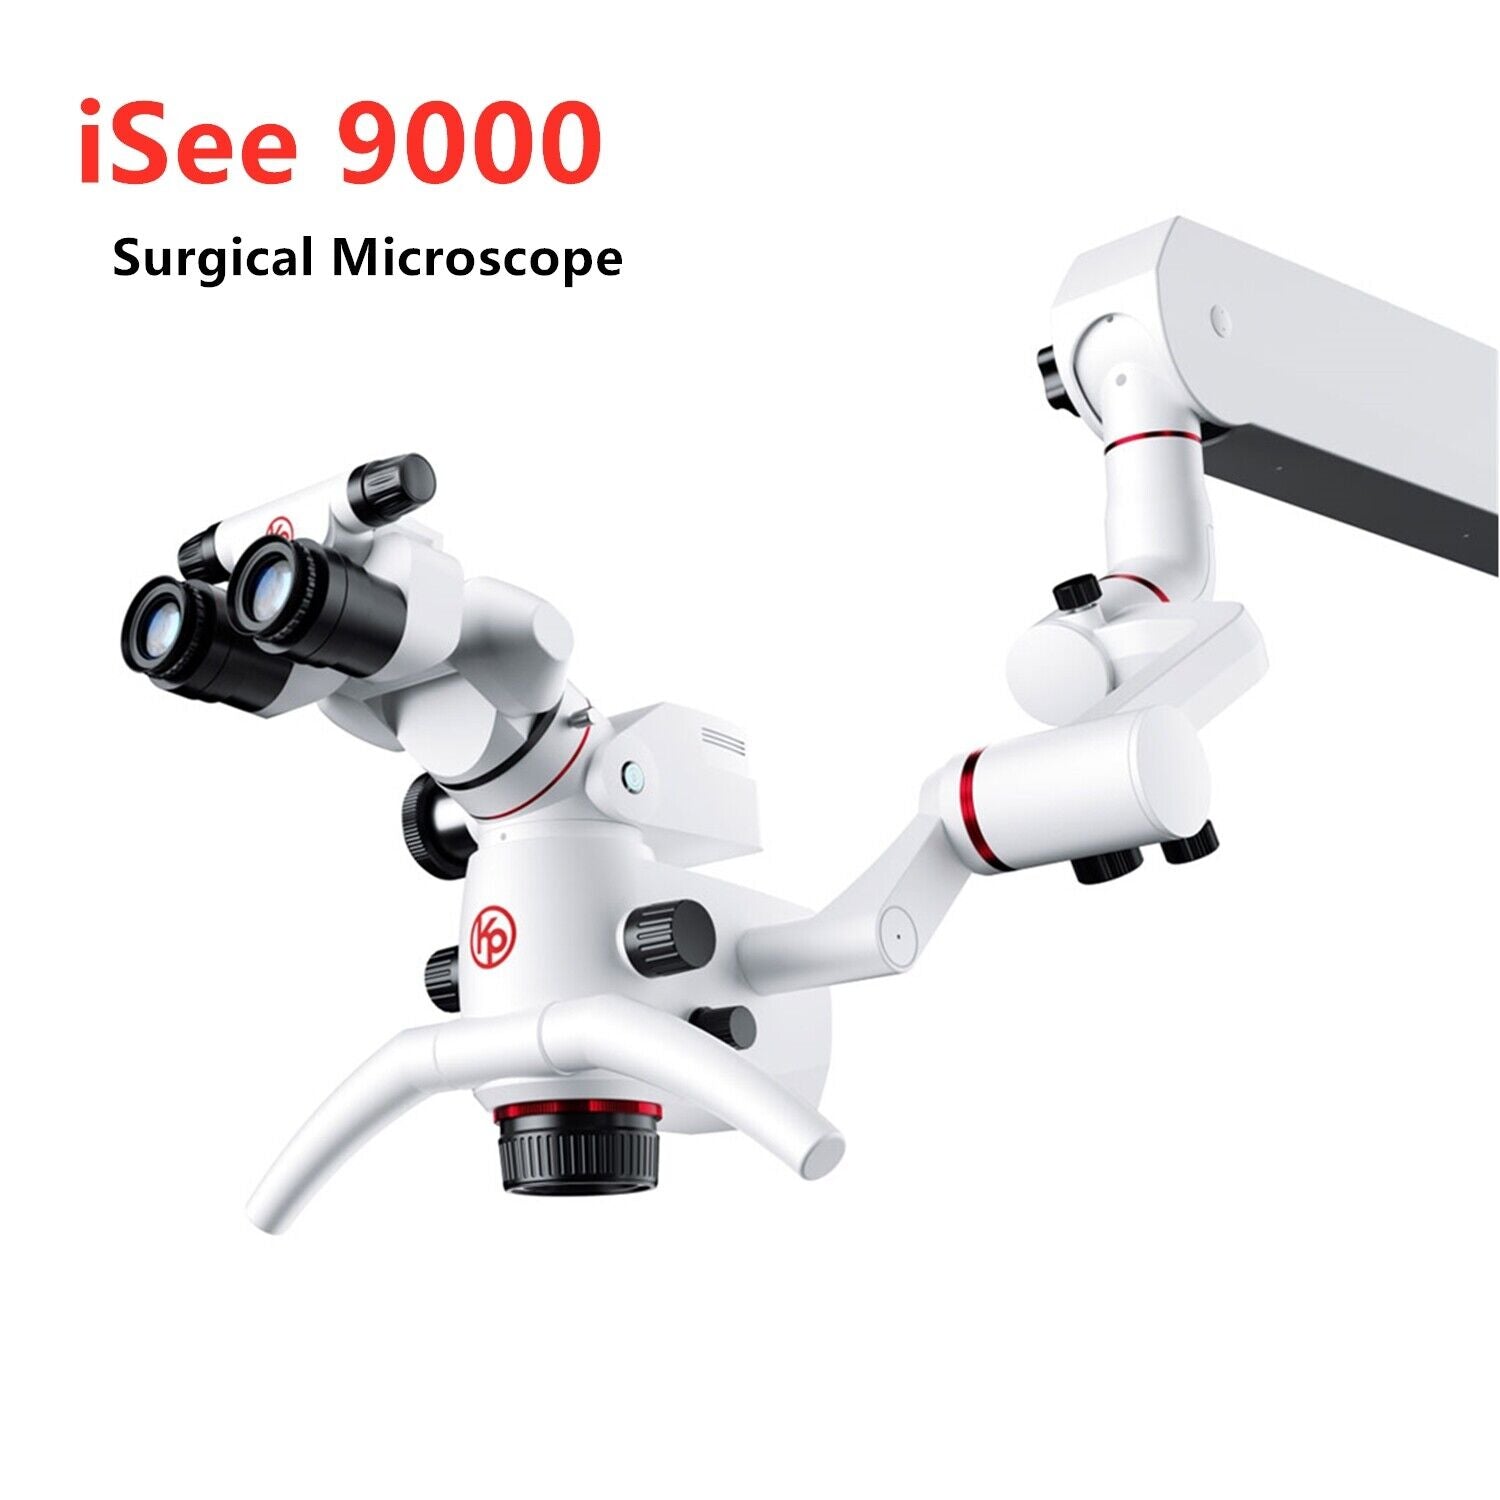 iSee9000 Surgical Microscope--High Configuration